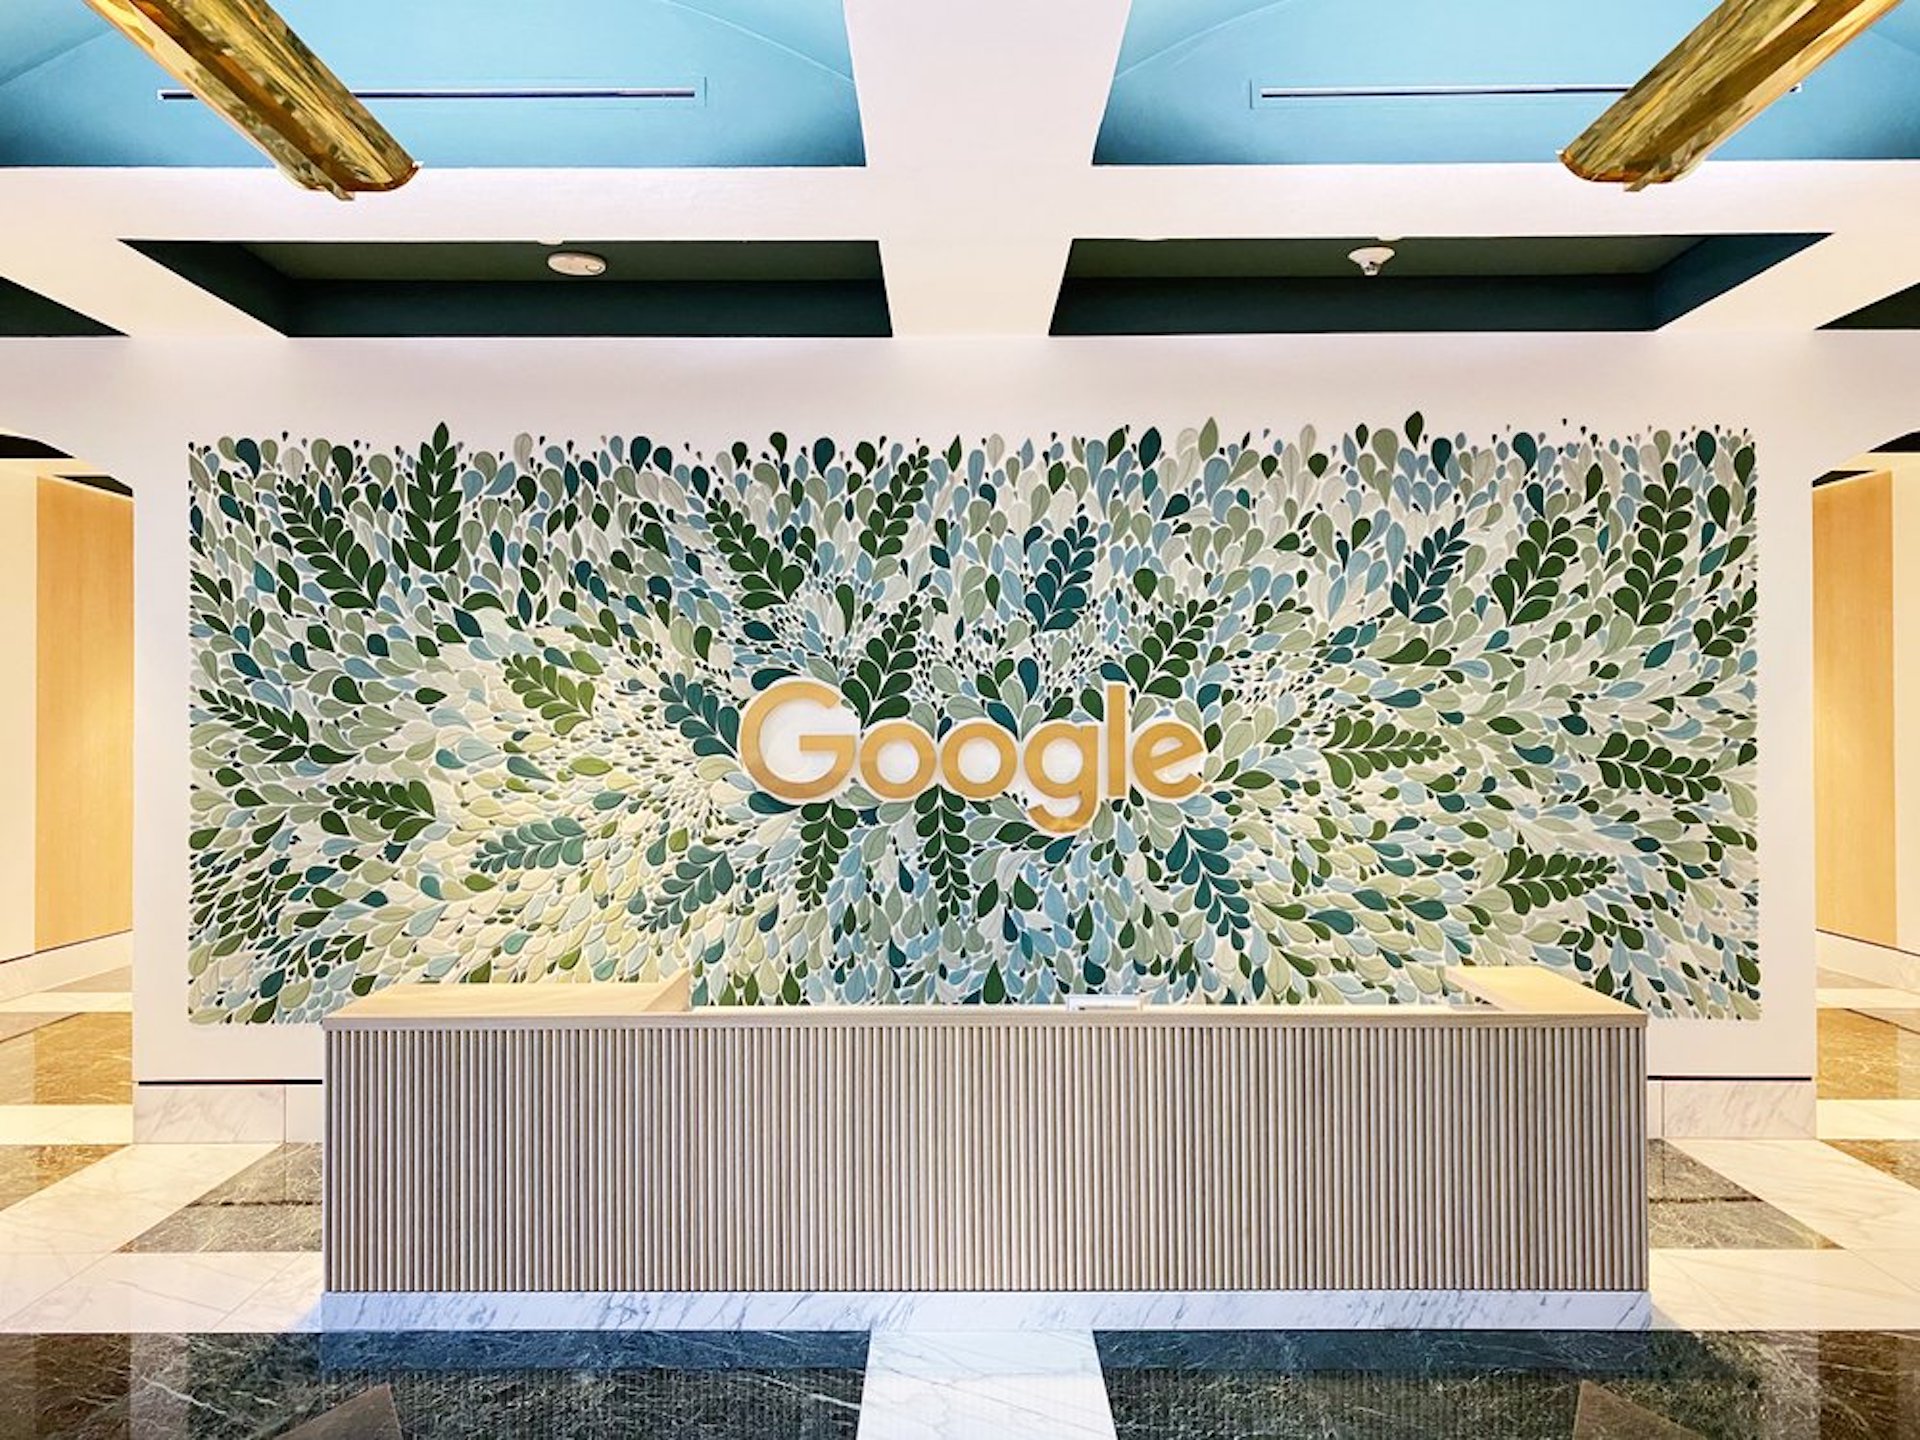 12 Incredible Google Offices Around The World – With Decor Products You Can Own